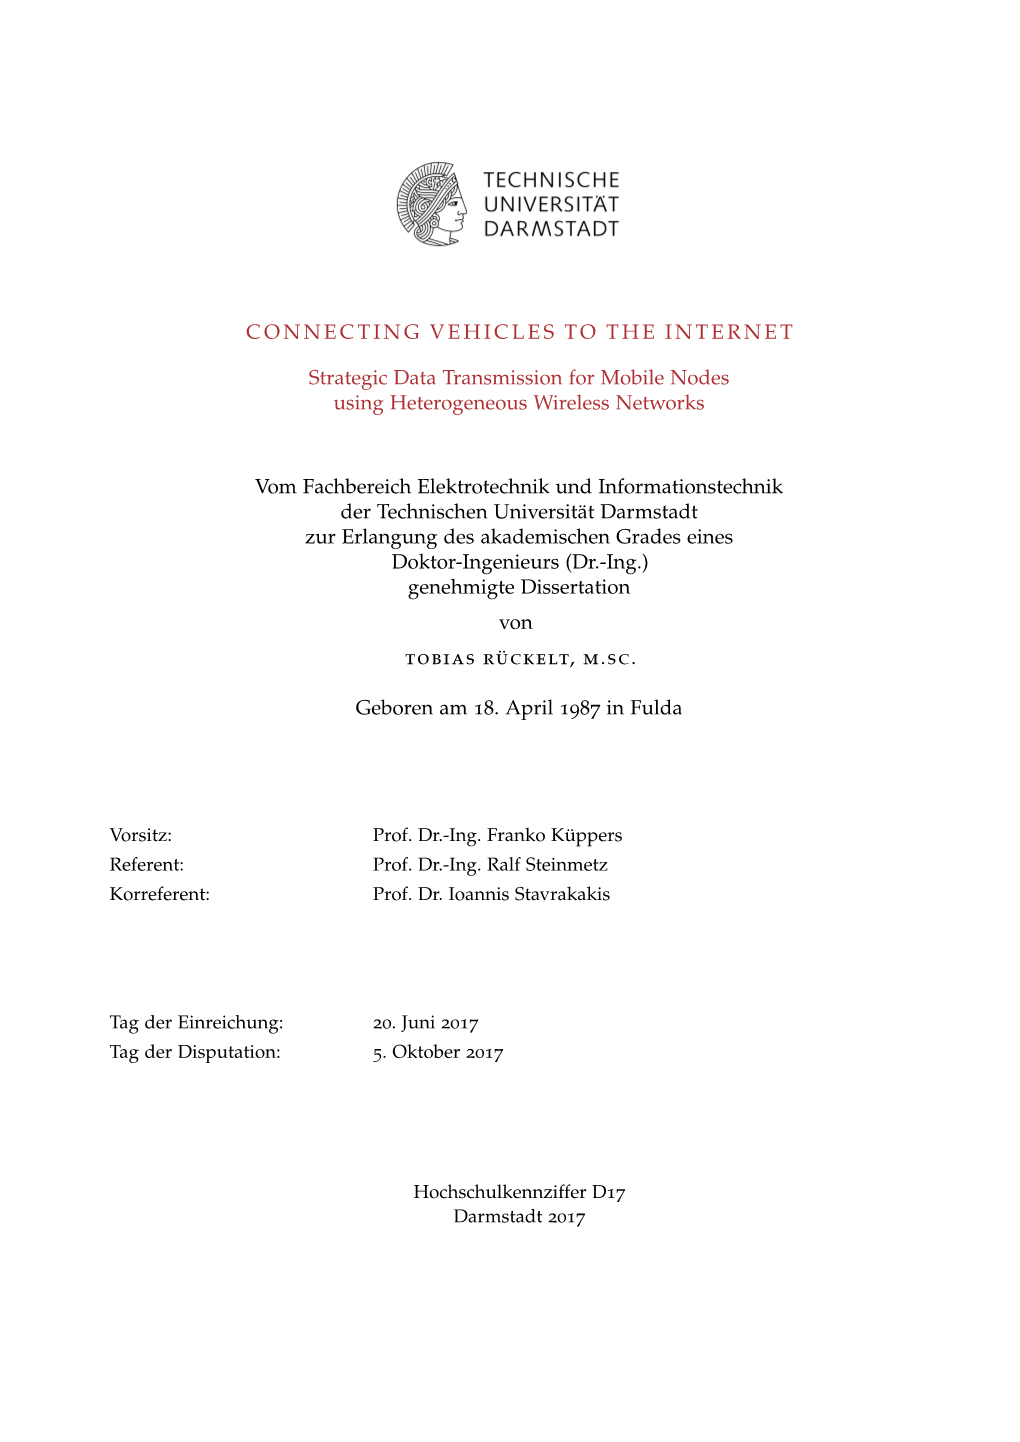 Connecting Vehicles to the Internet, Strategic Data Transmission for Mobile Nodes Using Heterogeneous Wireless Networks C 2017 ABSTRACT